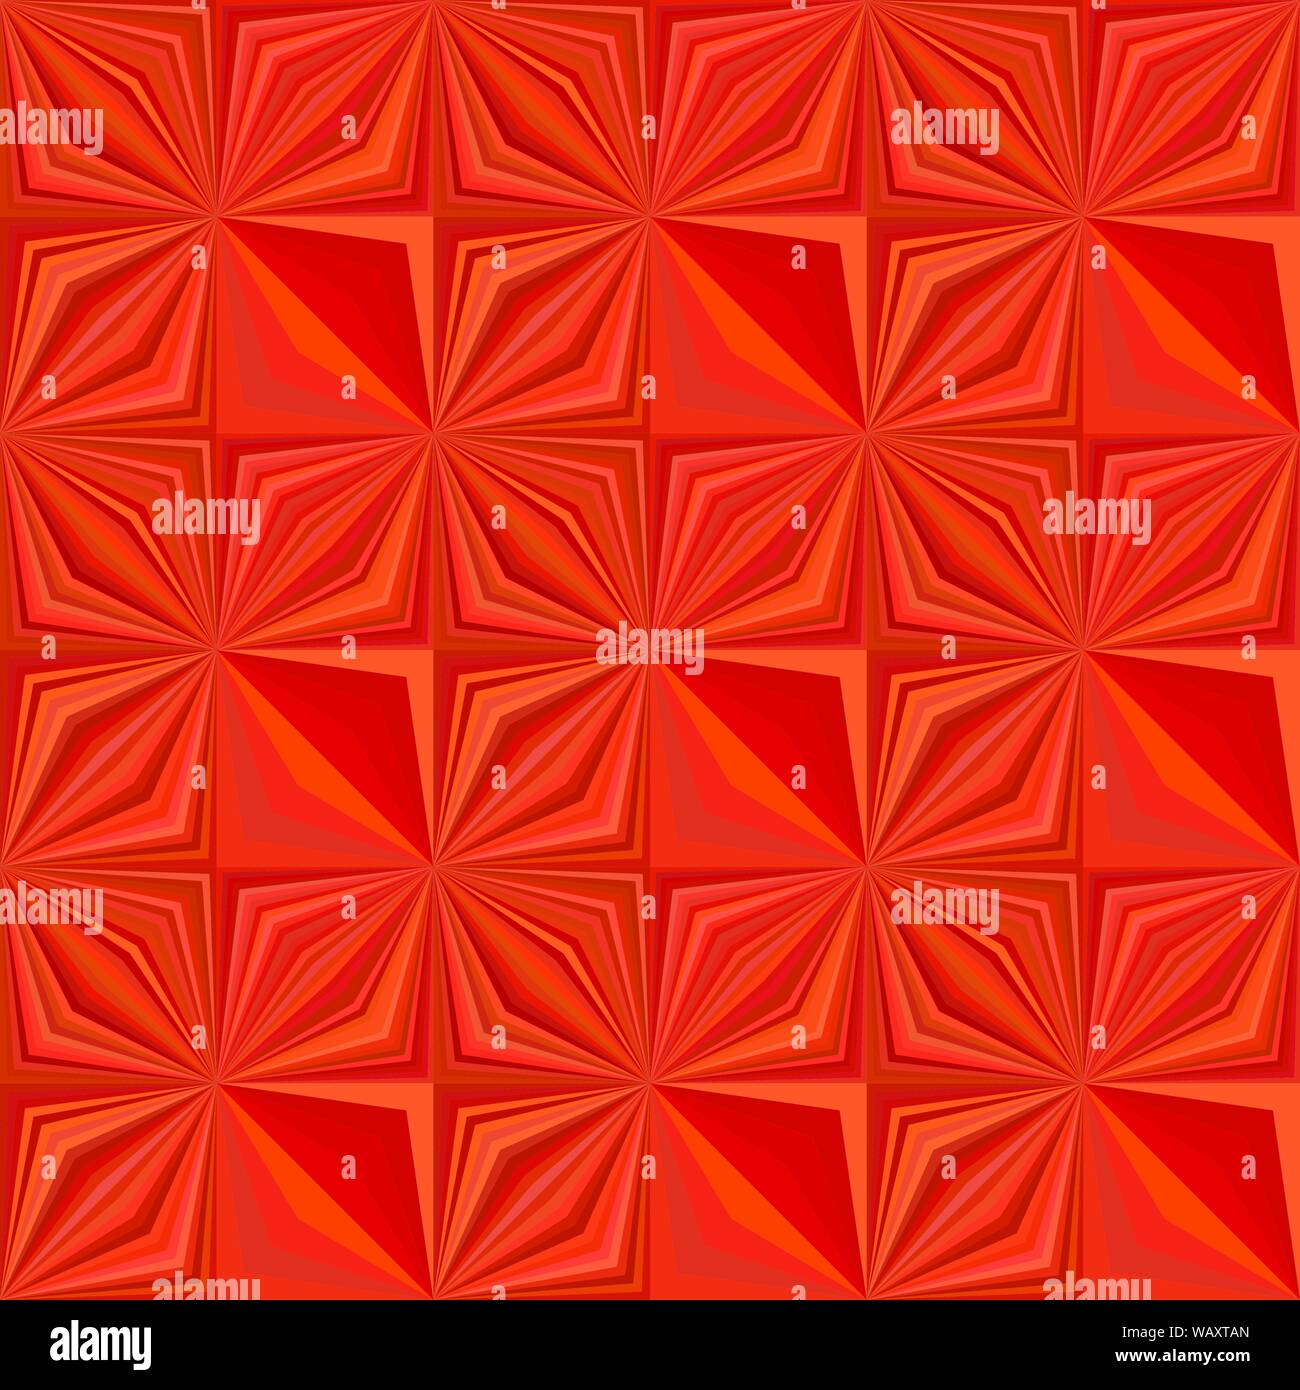 Red seamless striped shape pattern - vector tile mosaic background design Stock Vector